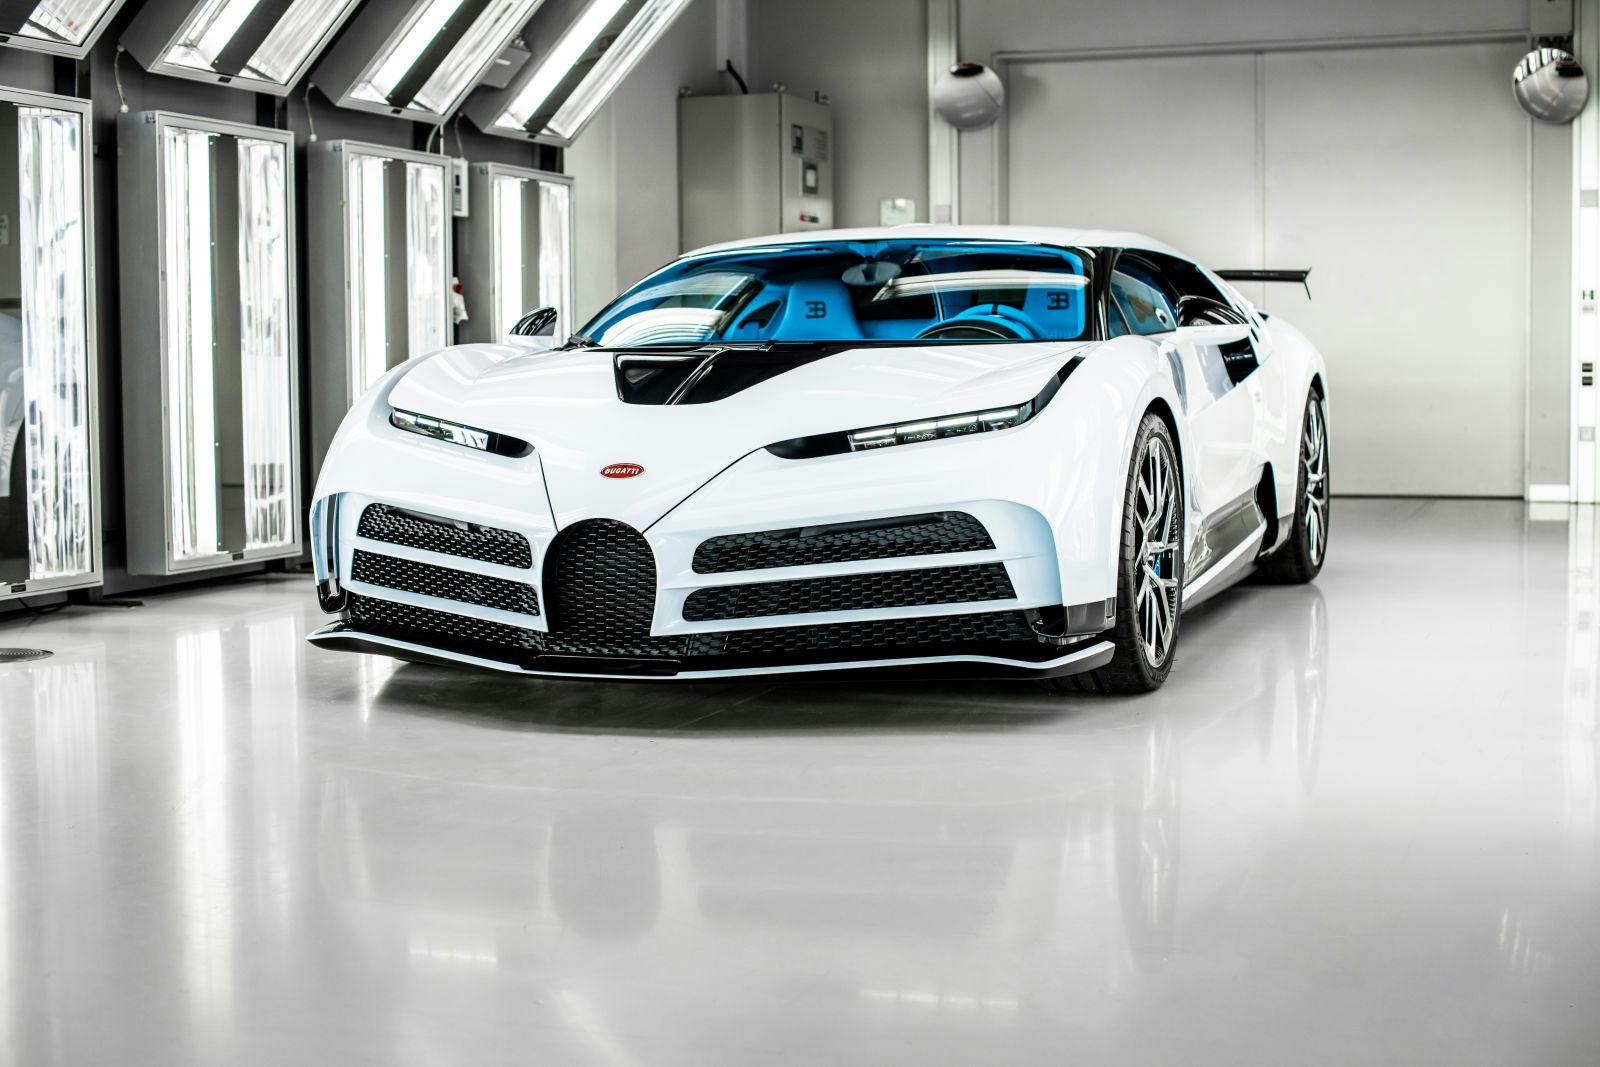 The delivery of the last Centodieci marks the end of the modern era of coachbuilding for Bugatti.